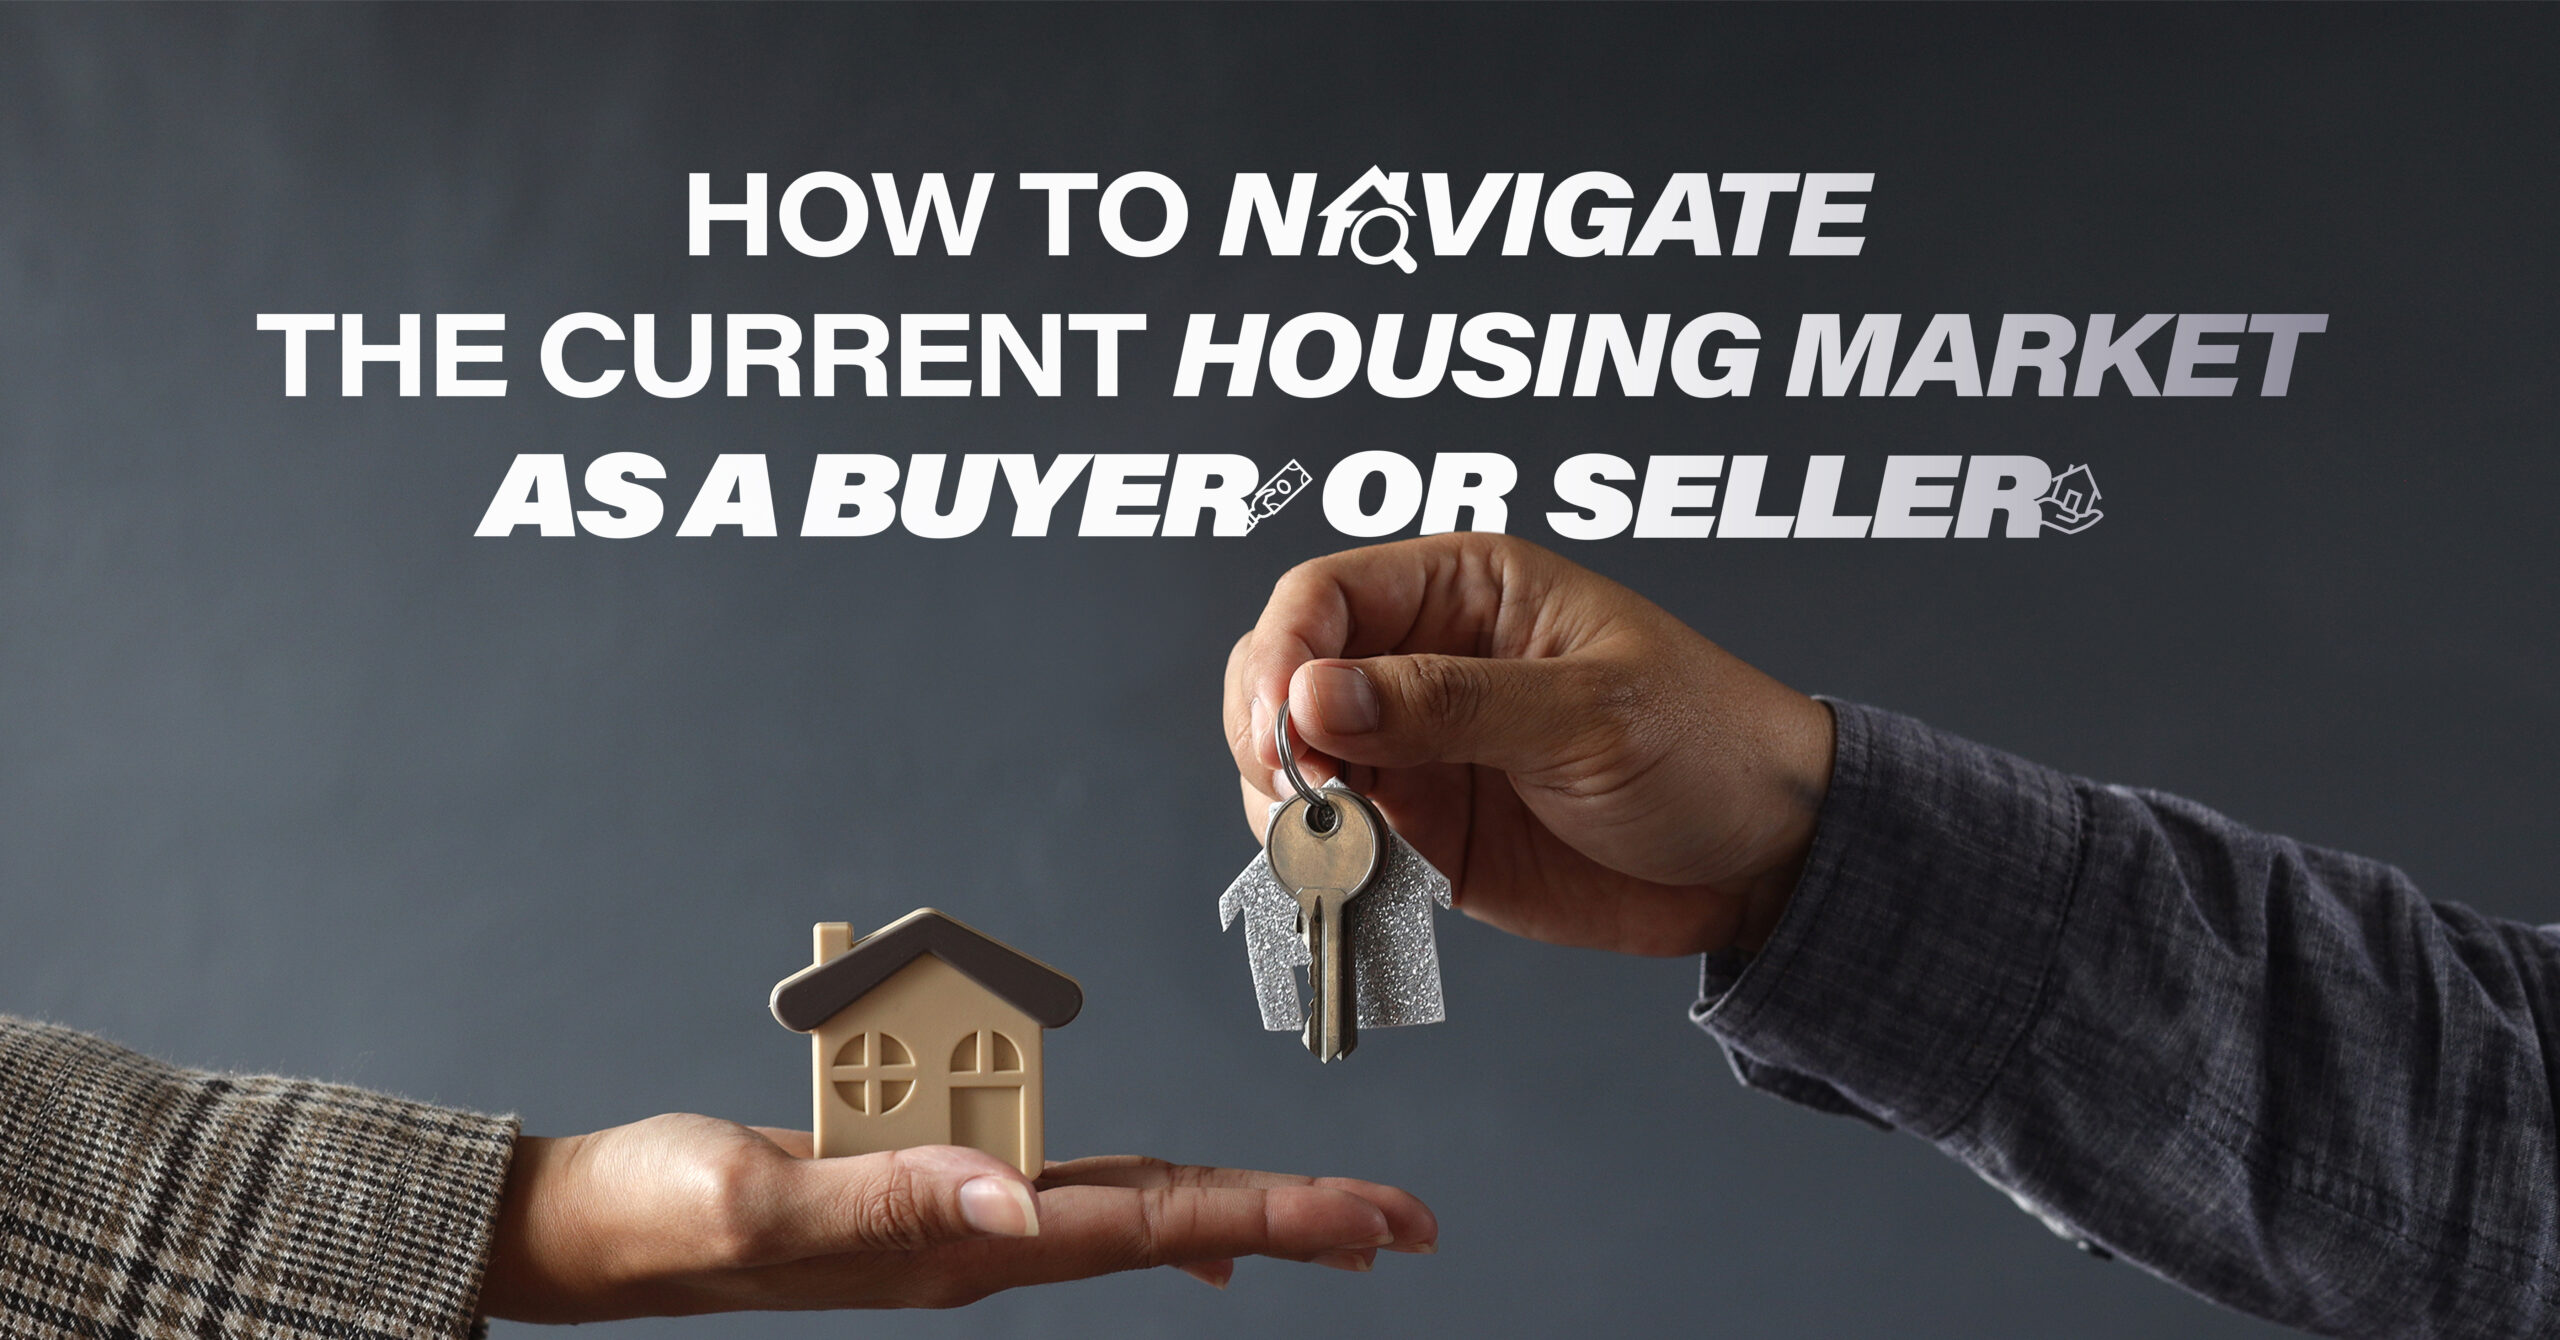 How to Navigate the Current Housing Market as a Buyer or Seller